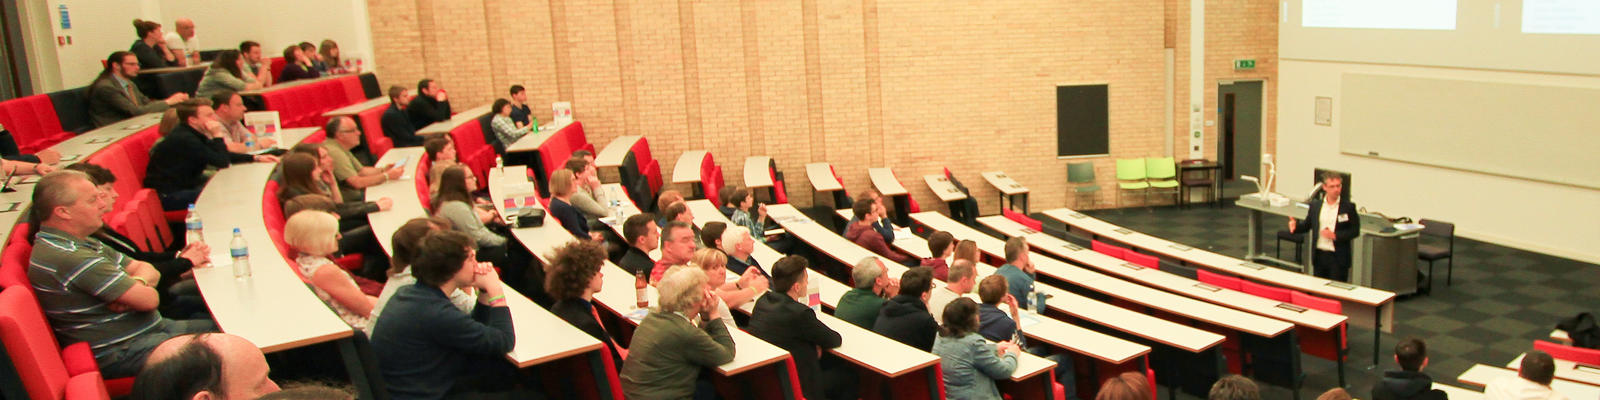 Lecture theatre, with students attending.